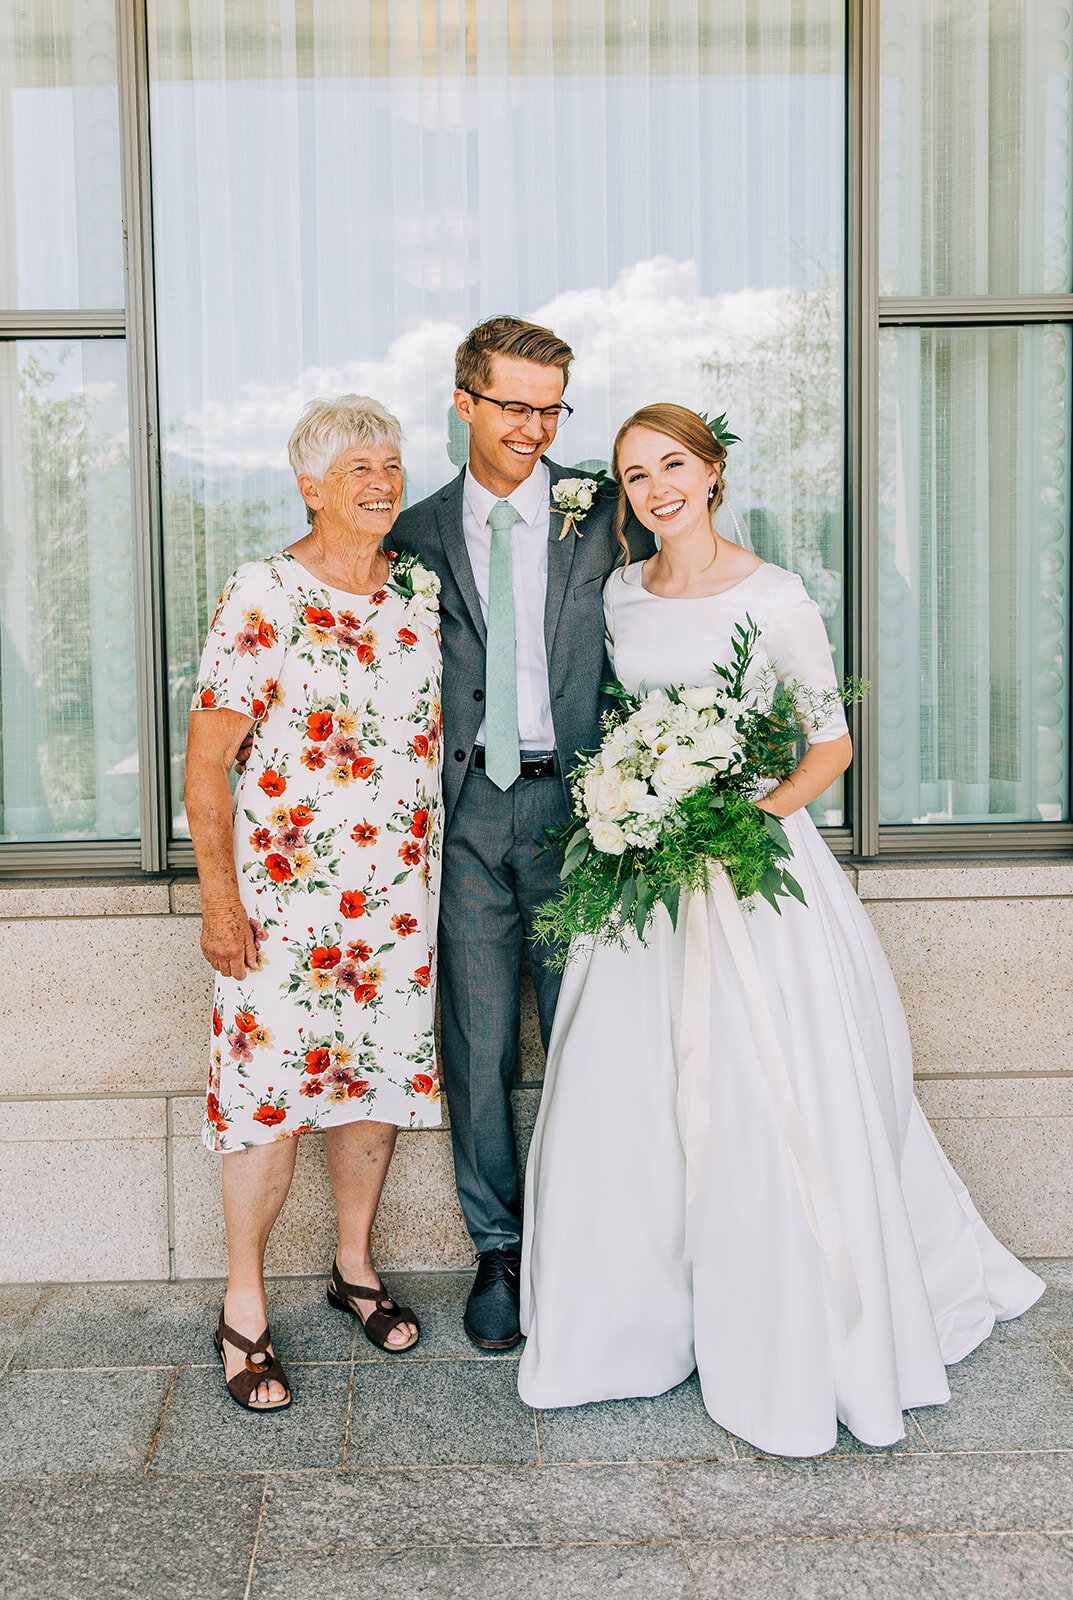  bride and groom posing with family for family pictures after the wedding ceremony in the oquirrh mountain lds temple south jordan utah professional wedding day photography pictures outside the temple with friends and family modest wedding gown elbow